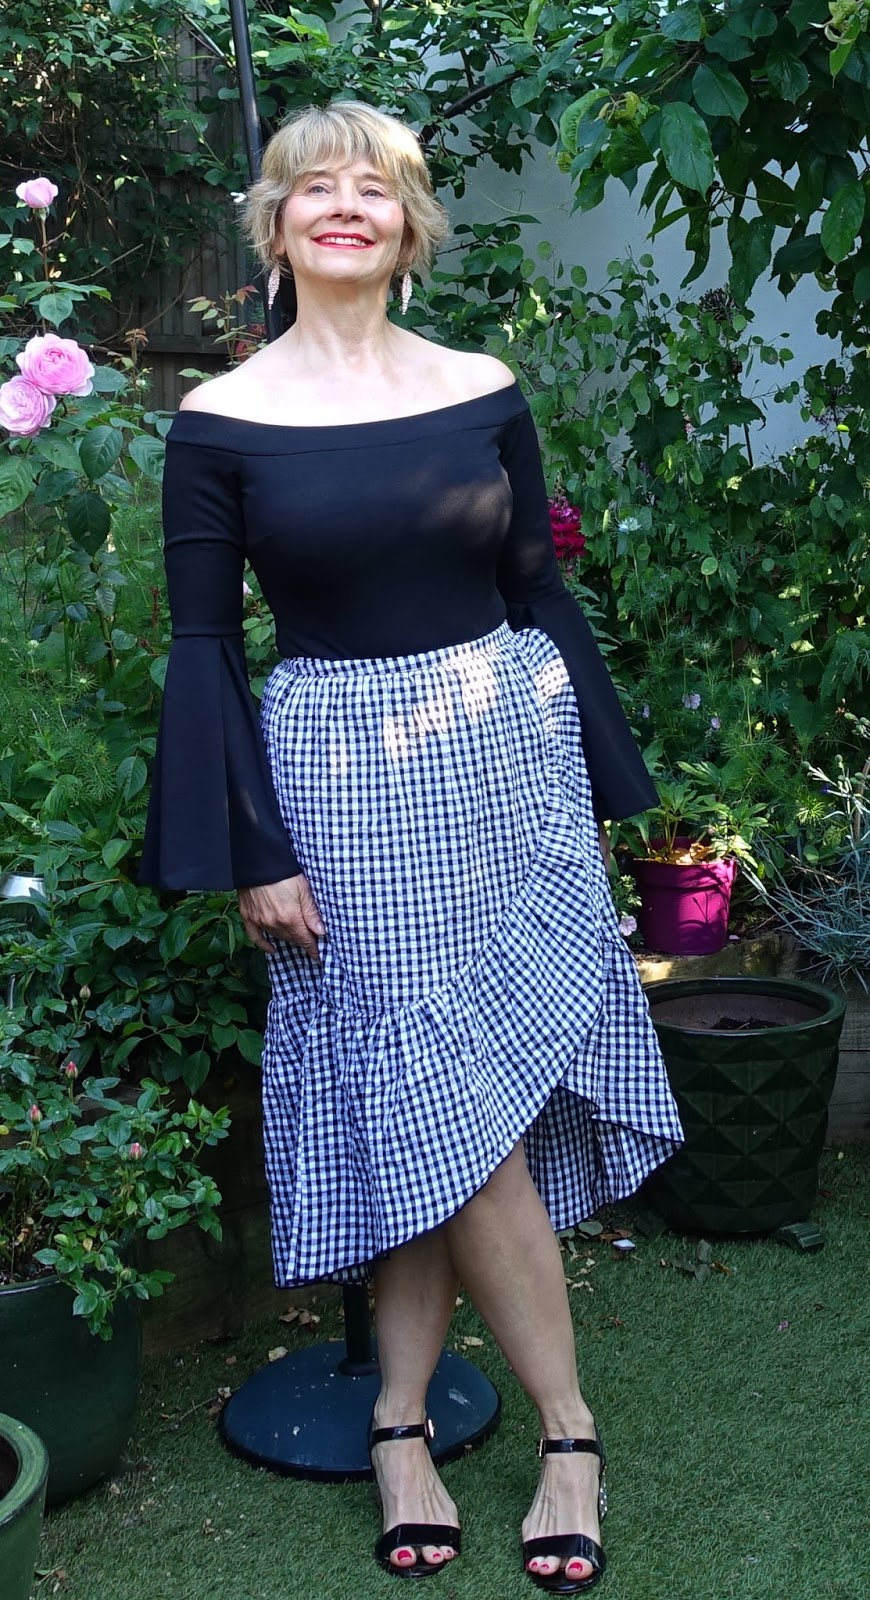 Black and white gingham skirt styled with a black Bardot top and black embellished heel sandals